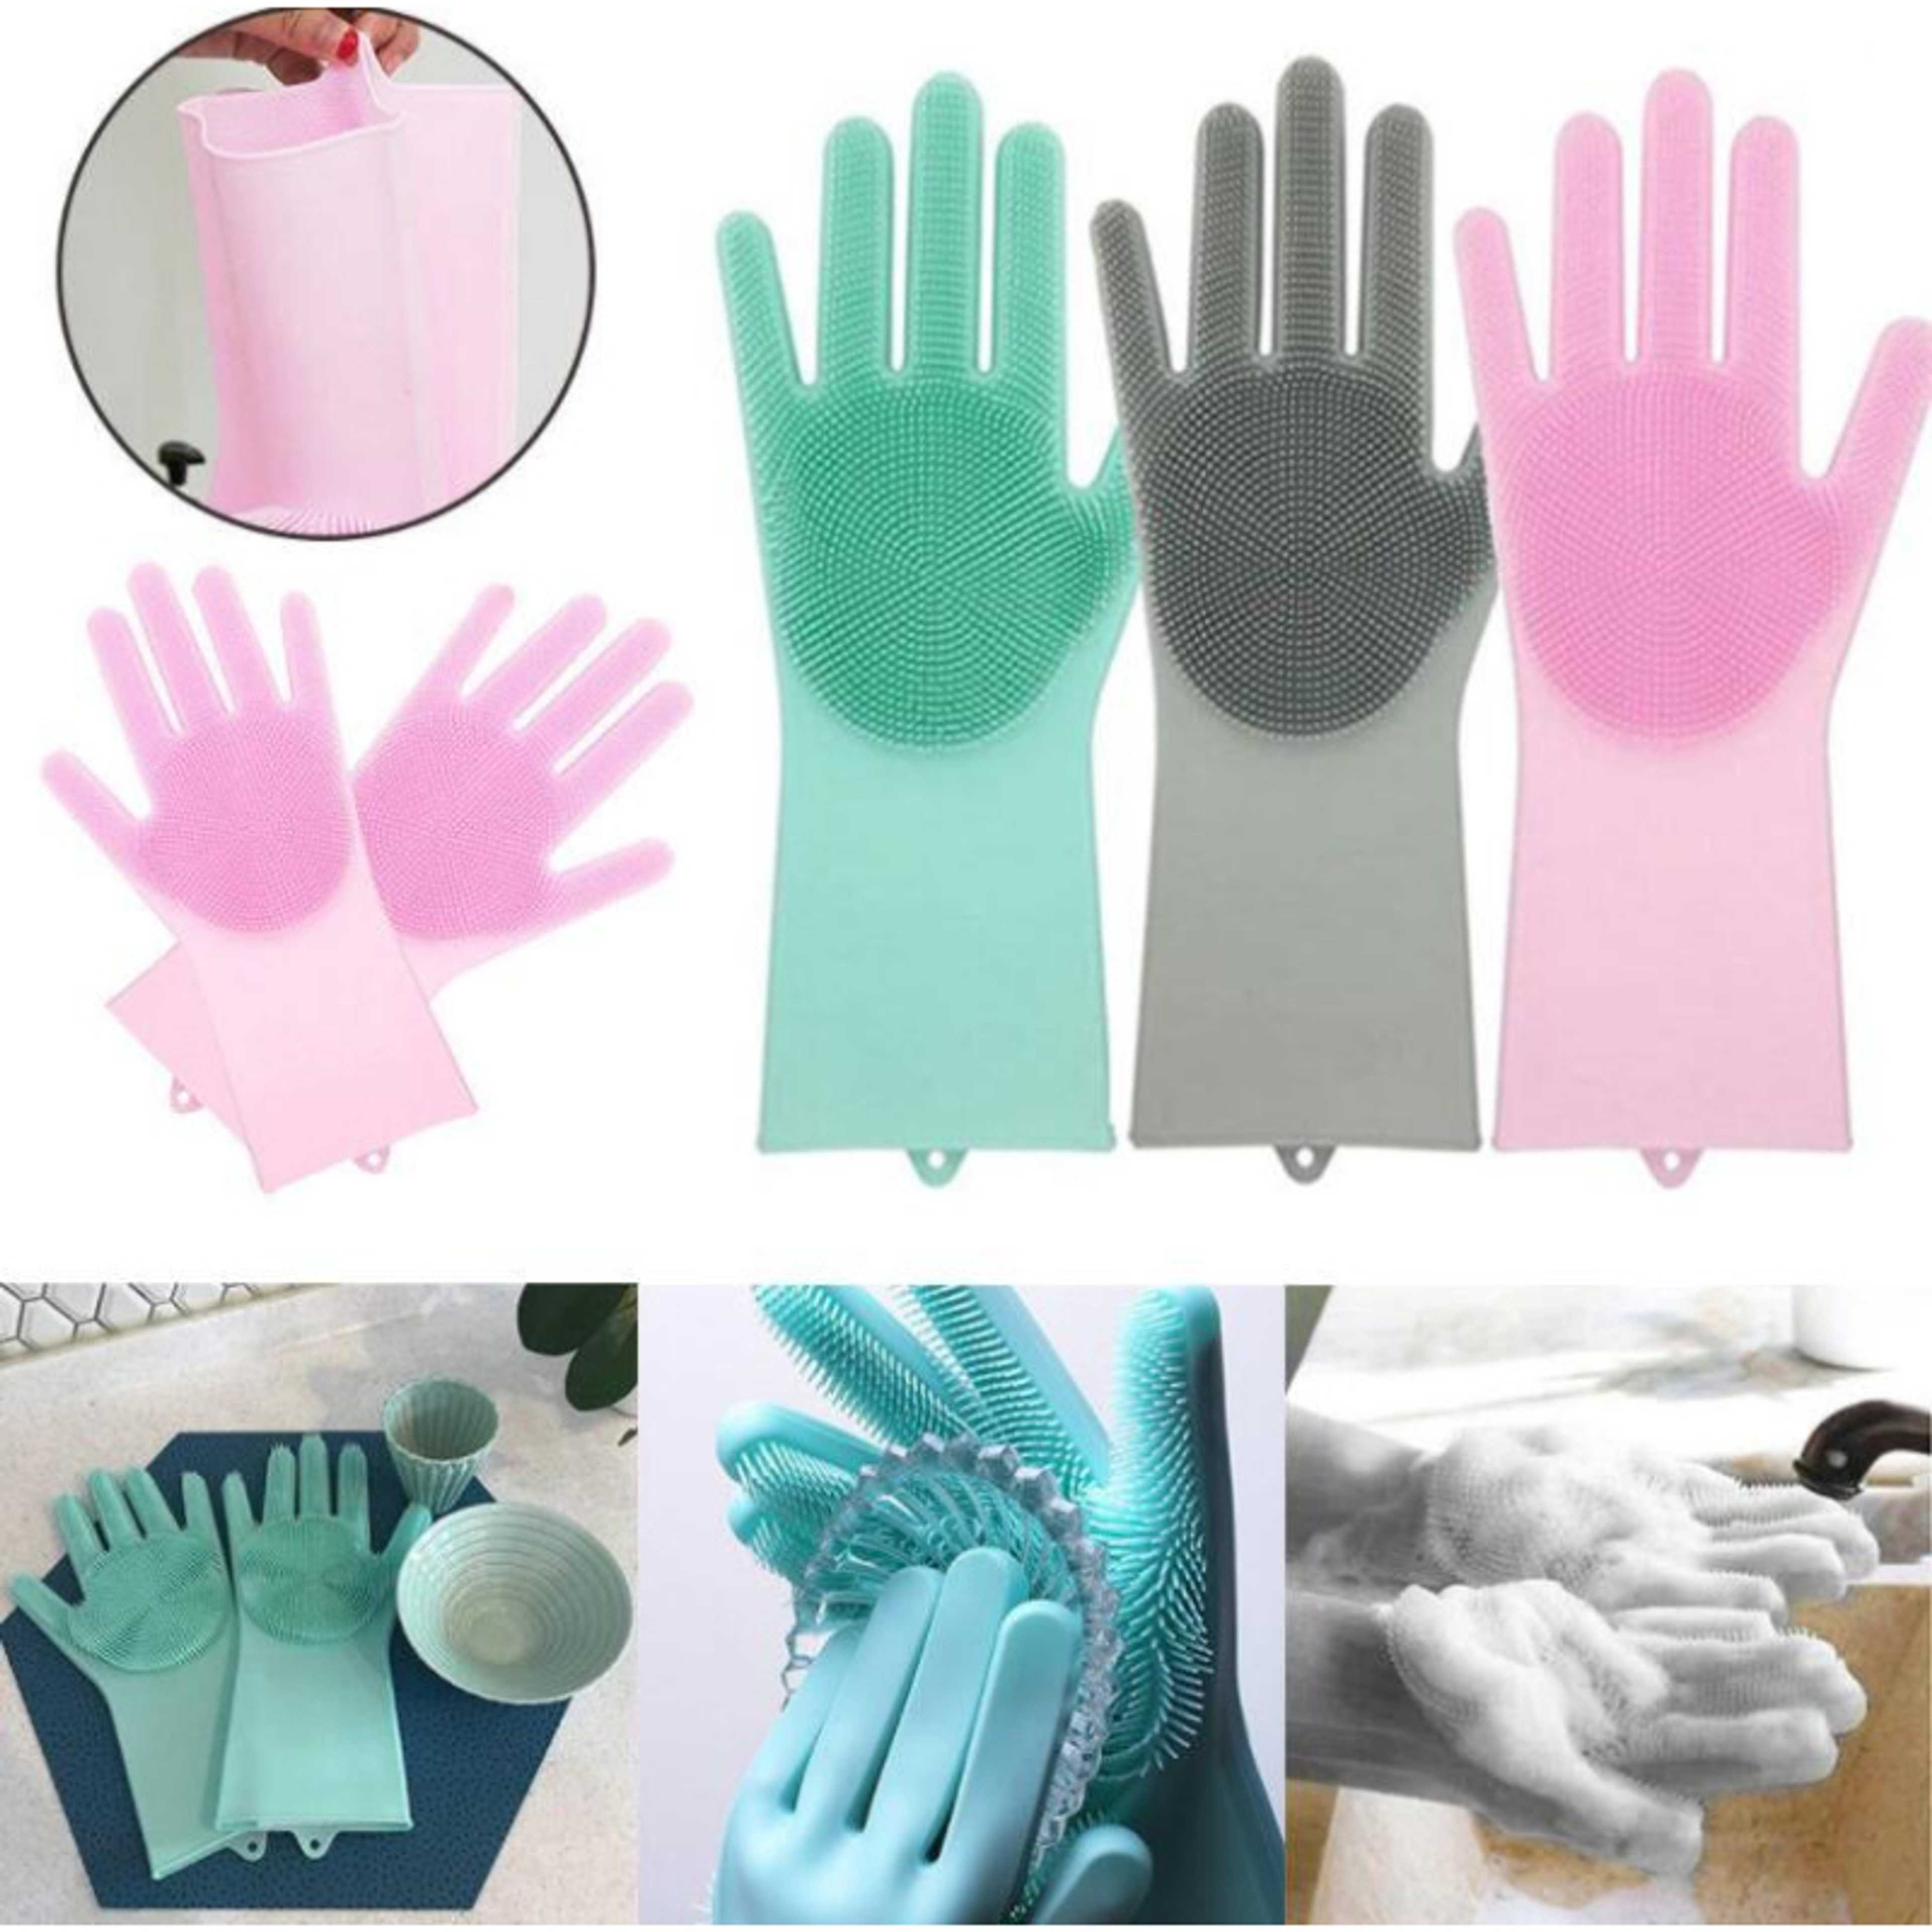 Reusable Magic Dish washing Gloves with scrubber, Silicone Cleaning, Scrub Gloves for Wash Dish, Car Washing, Kitchen, Bathroom Multipurpose Usage